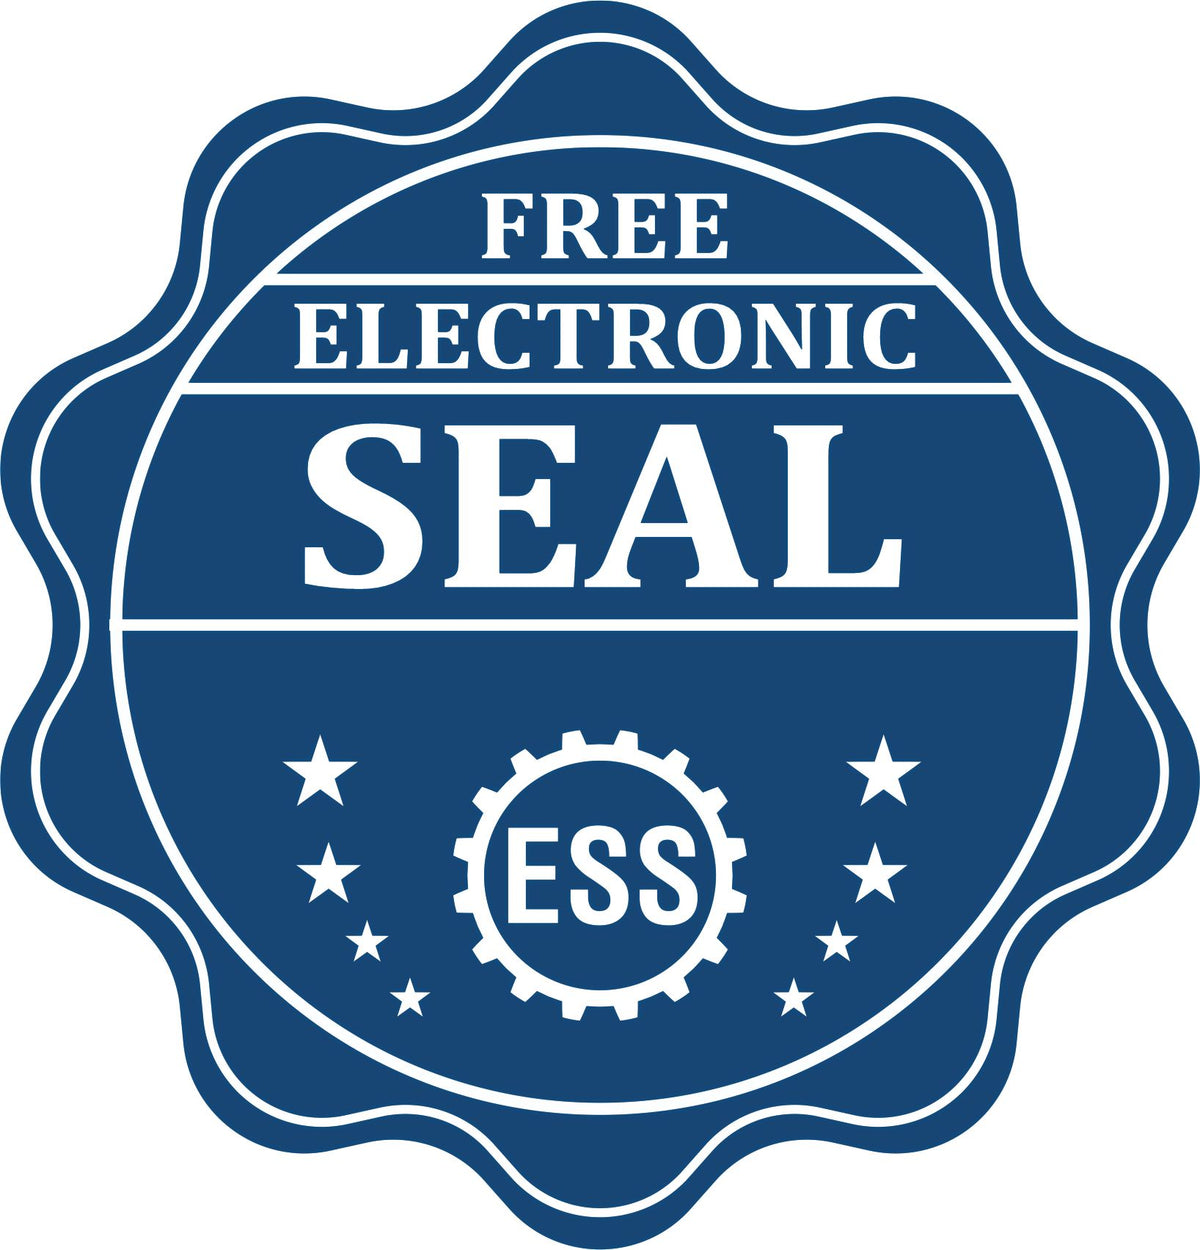 A badge showing a free electronic seal for the Hybrid Vermont Architect Seal with stars and the ESS gear on the emblem.